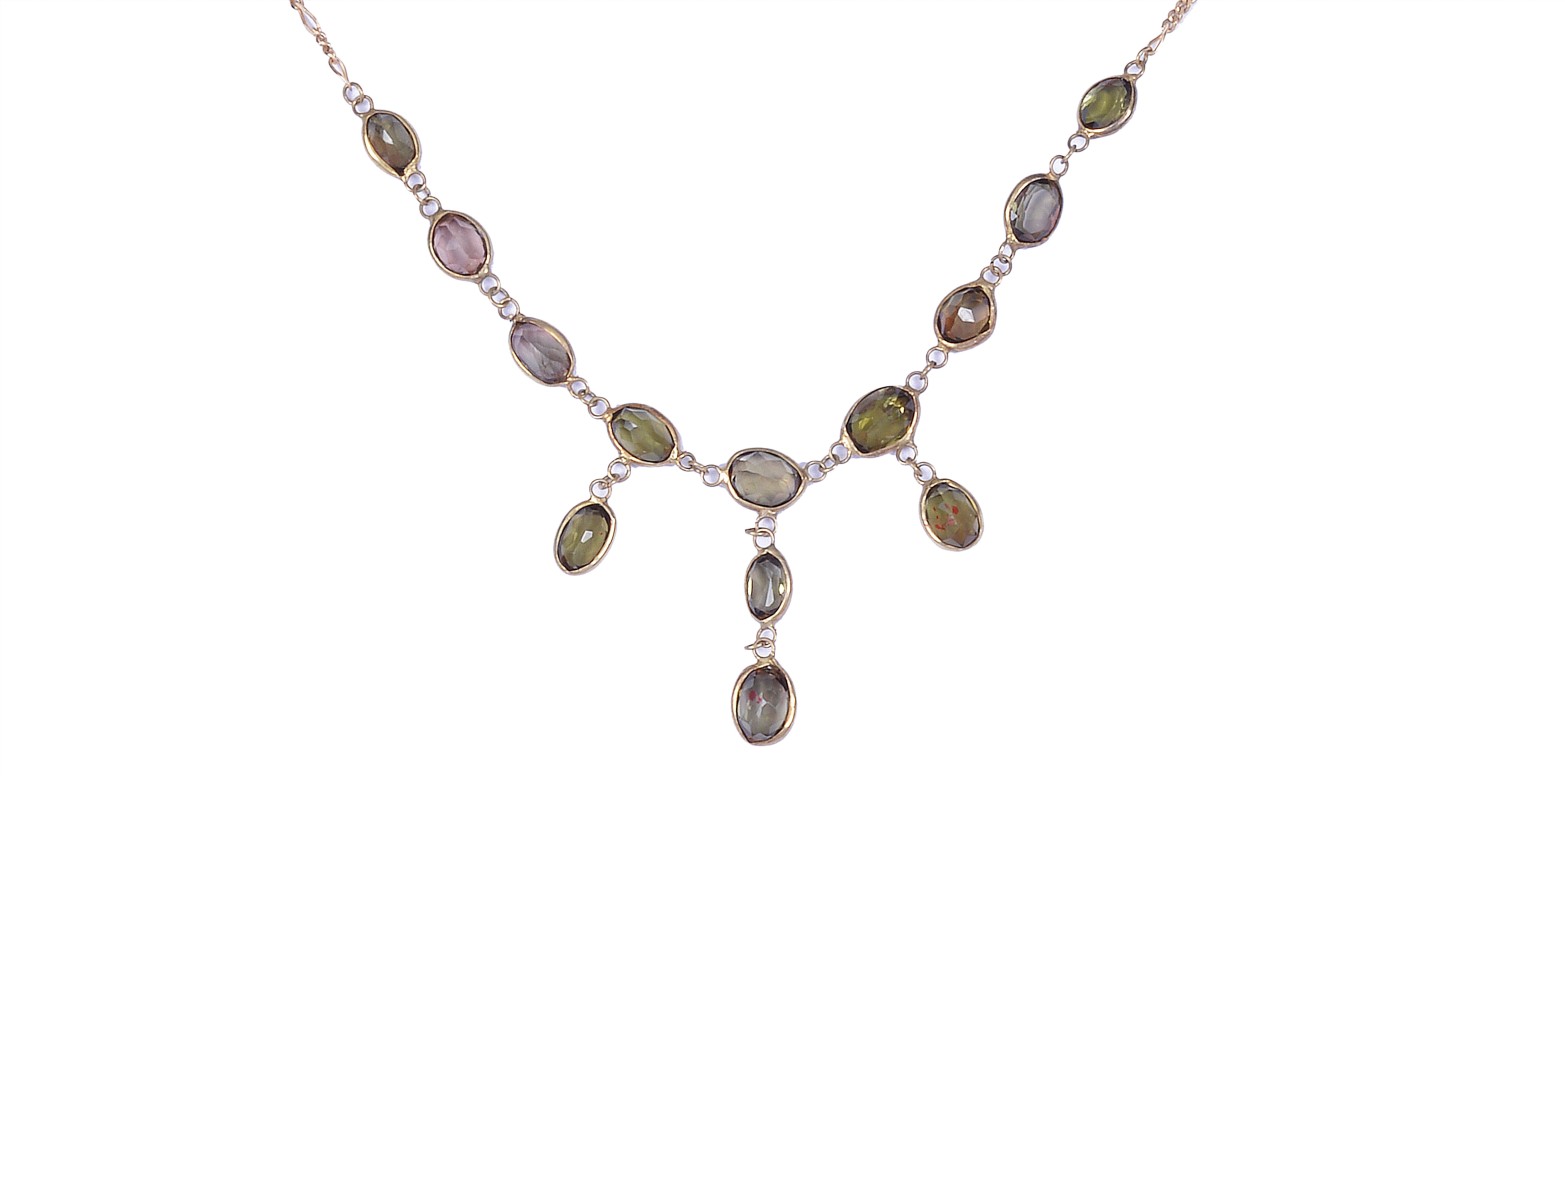 ANDALUSITE NECKLACE designed as a row of spectacle-set oval andalusite with graduated drops to the